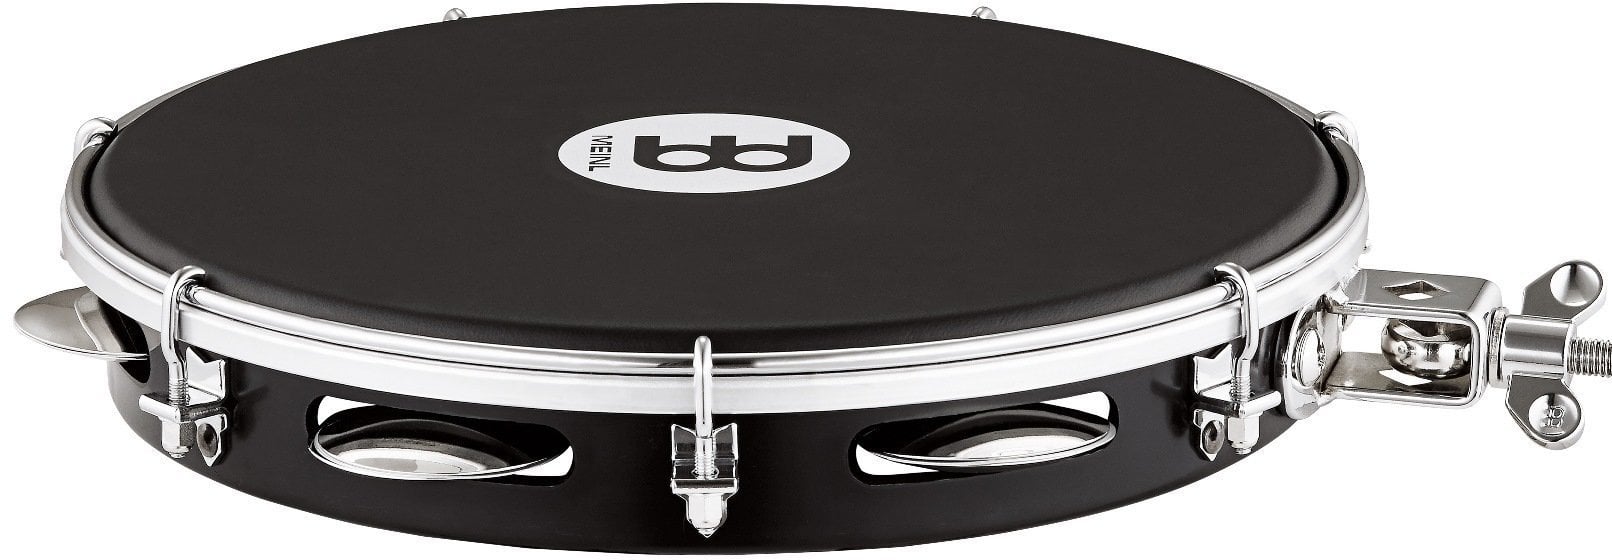 Speciale percussie voor samba Meinl PA10A-BK-NH-H Speciale percussie voor samba